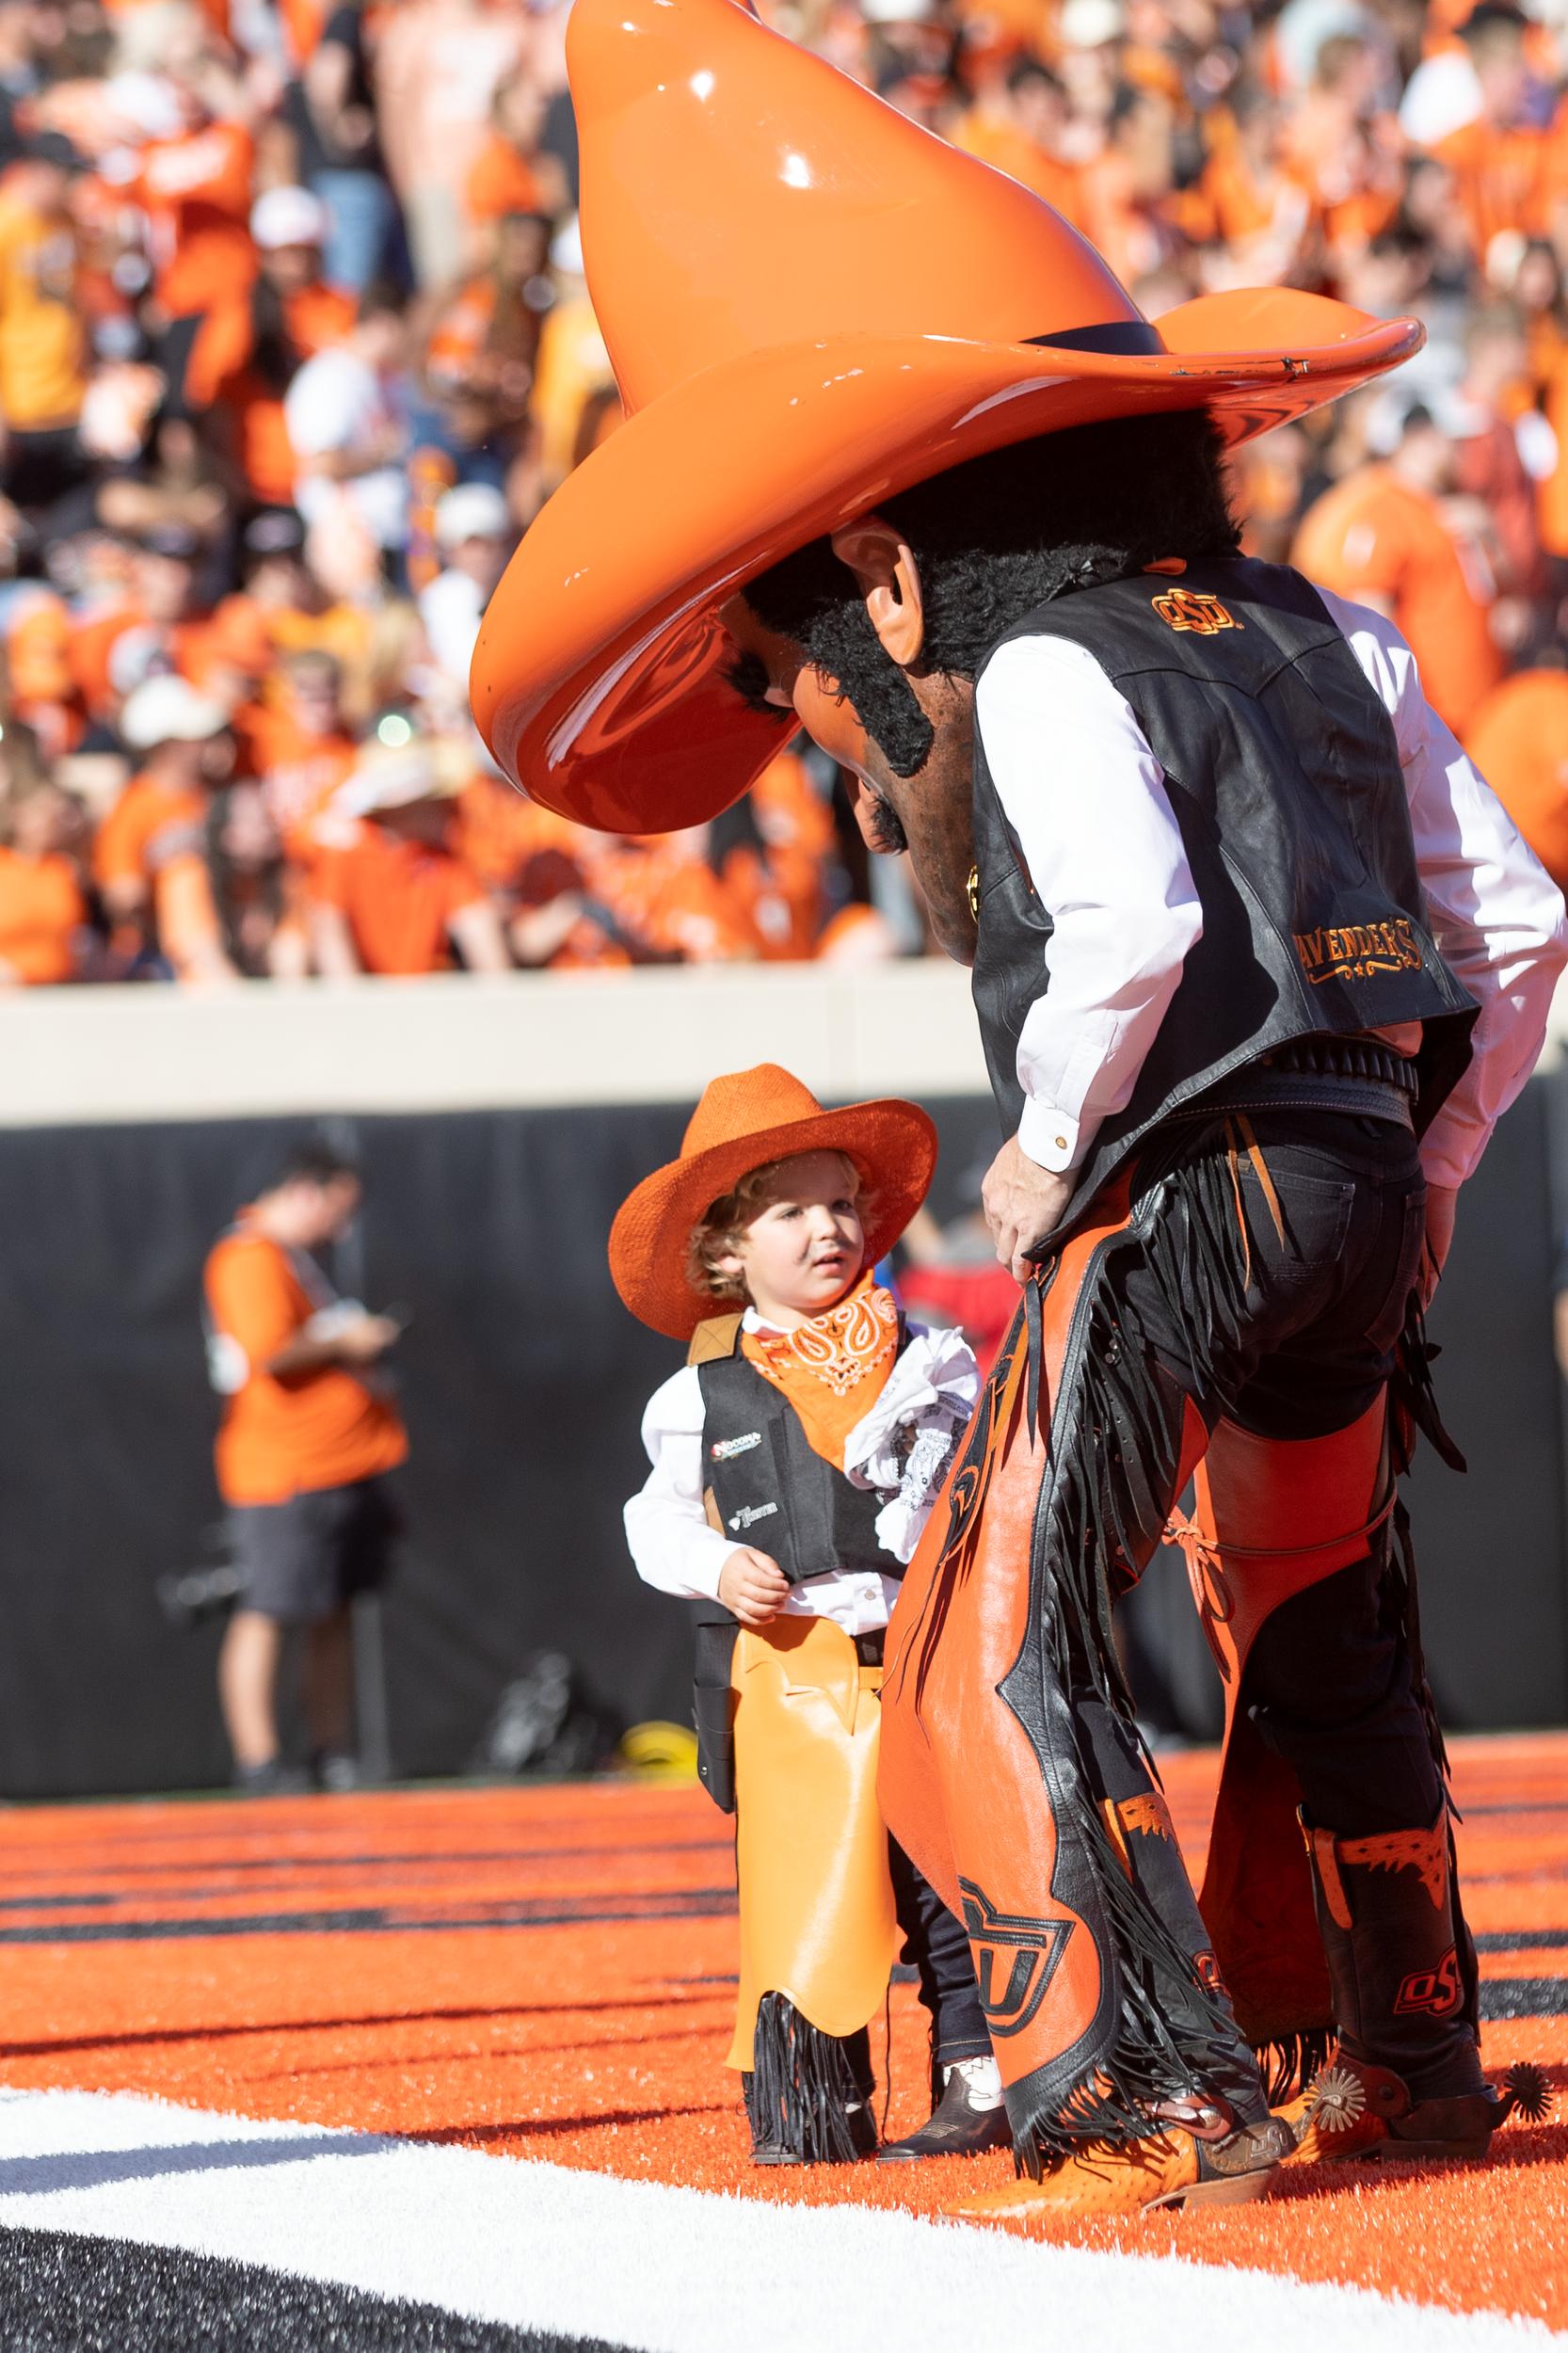 Pistol Pete stands on the field at Boone Pickens Stadium in the endzone while looking down at a young child who is dressed like him.